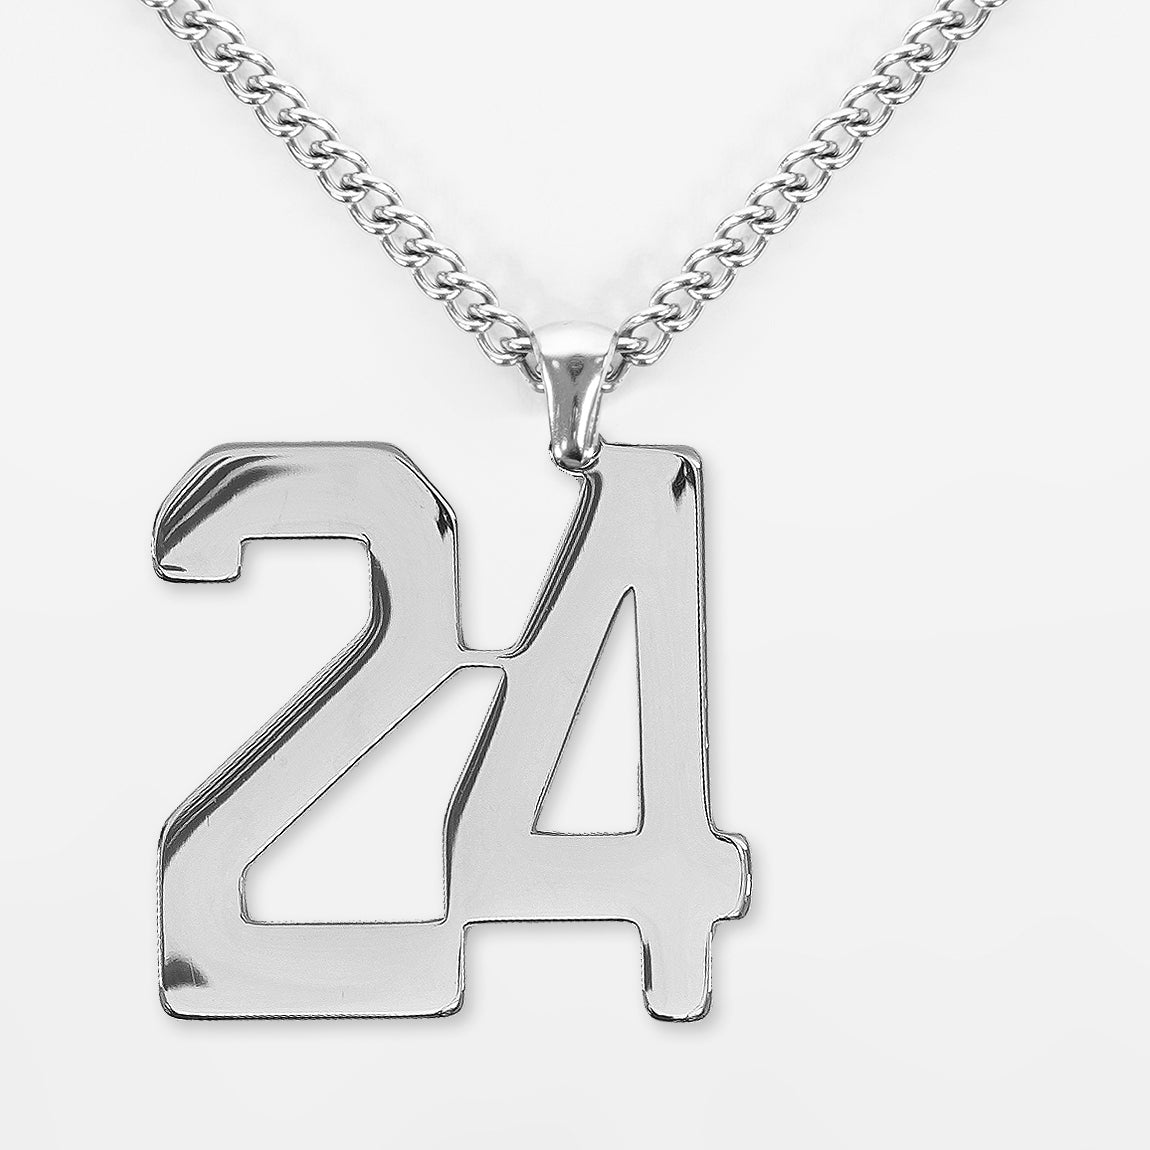 24 Number Pendant with Chain Necklace - Stainless Steel